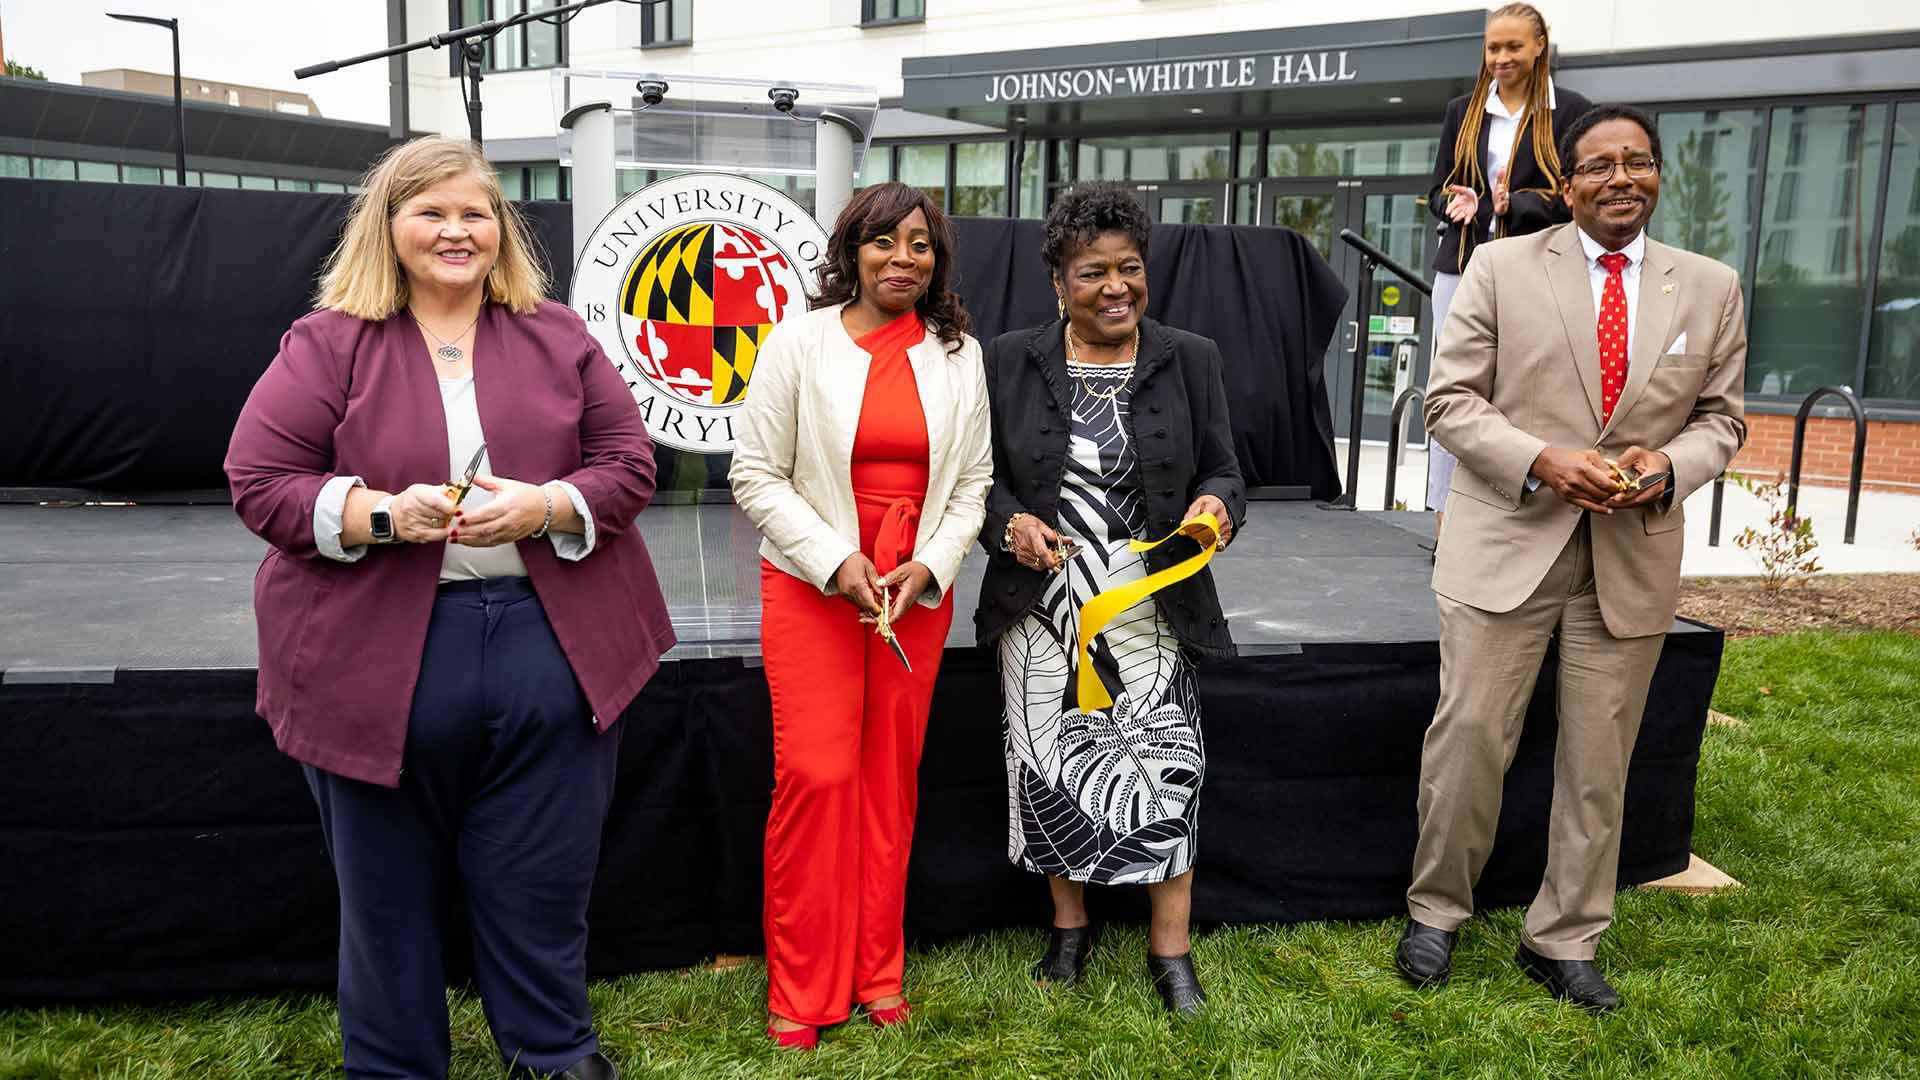 From left, Vice President for Student Affairs Patty Perillo; Glenise Whittle, the late Hiram Whittle's niece; Elaine Johnson Coates '59; and university President Darryll J. Pines cut the ribbon to dedicate Johnson-Whittle Hall today. Photo by Stephanie S. Cordle.